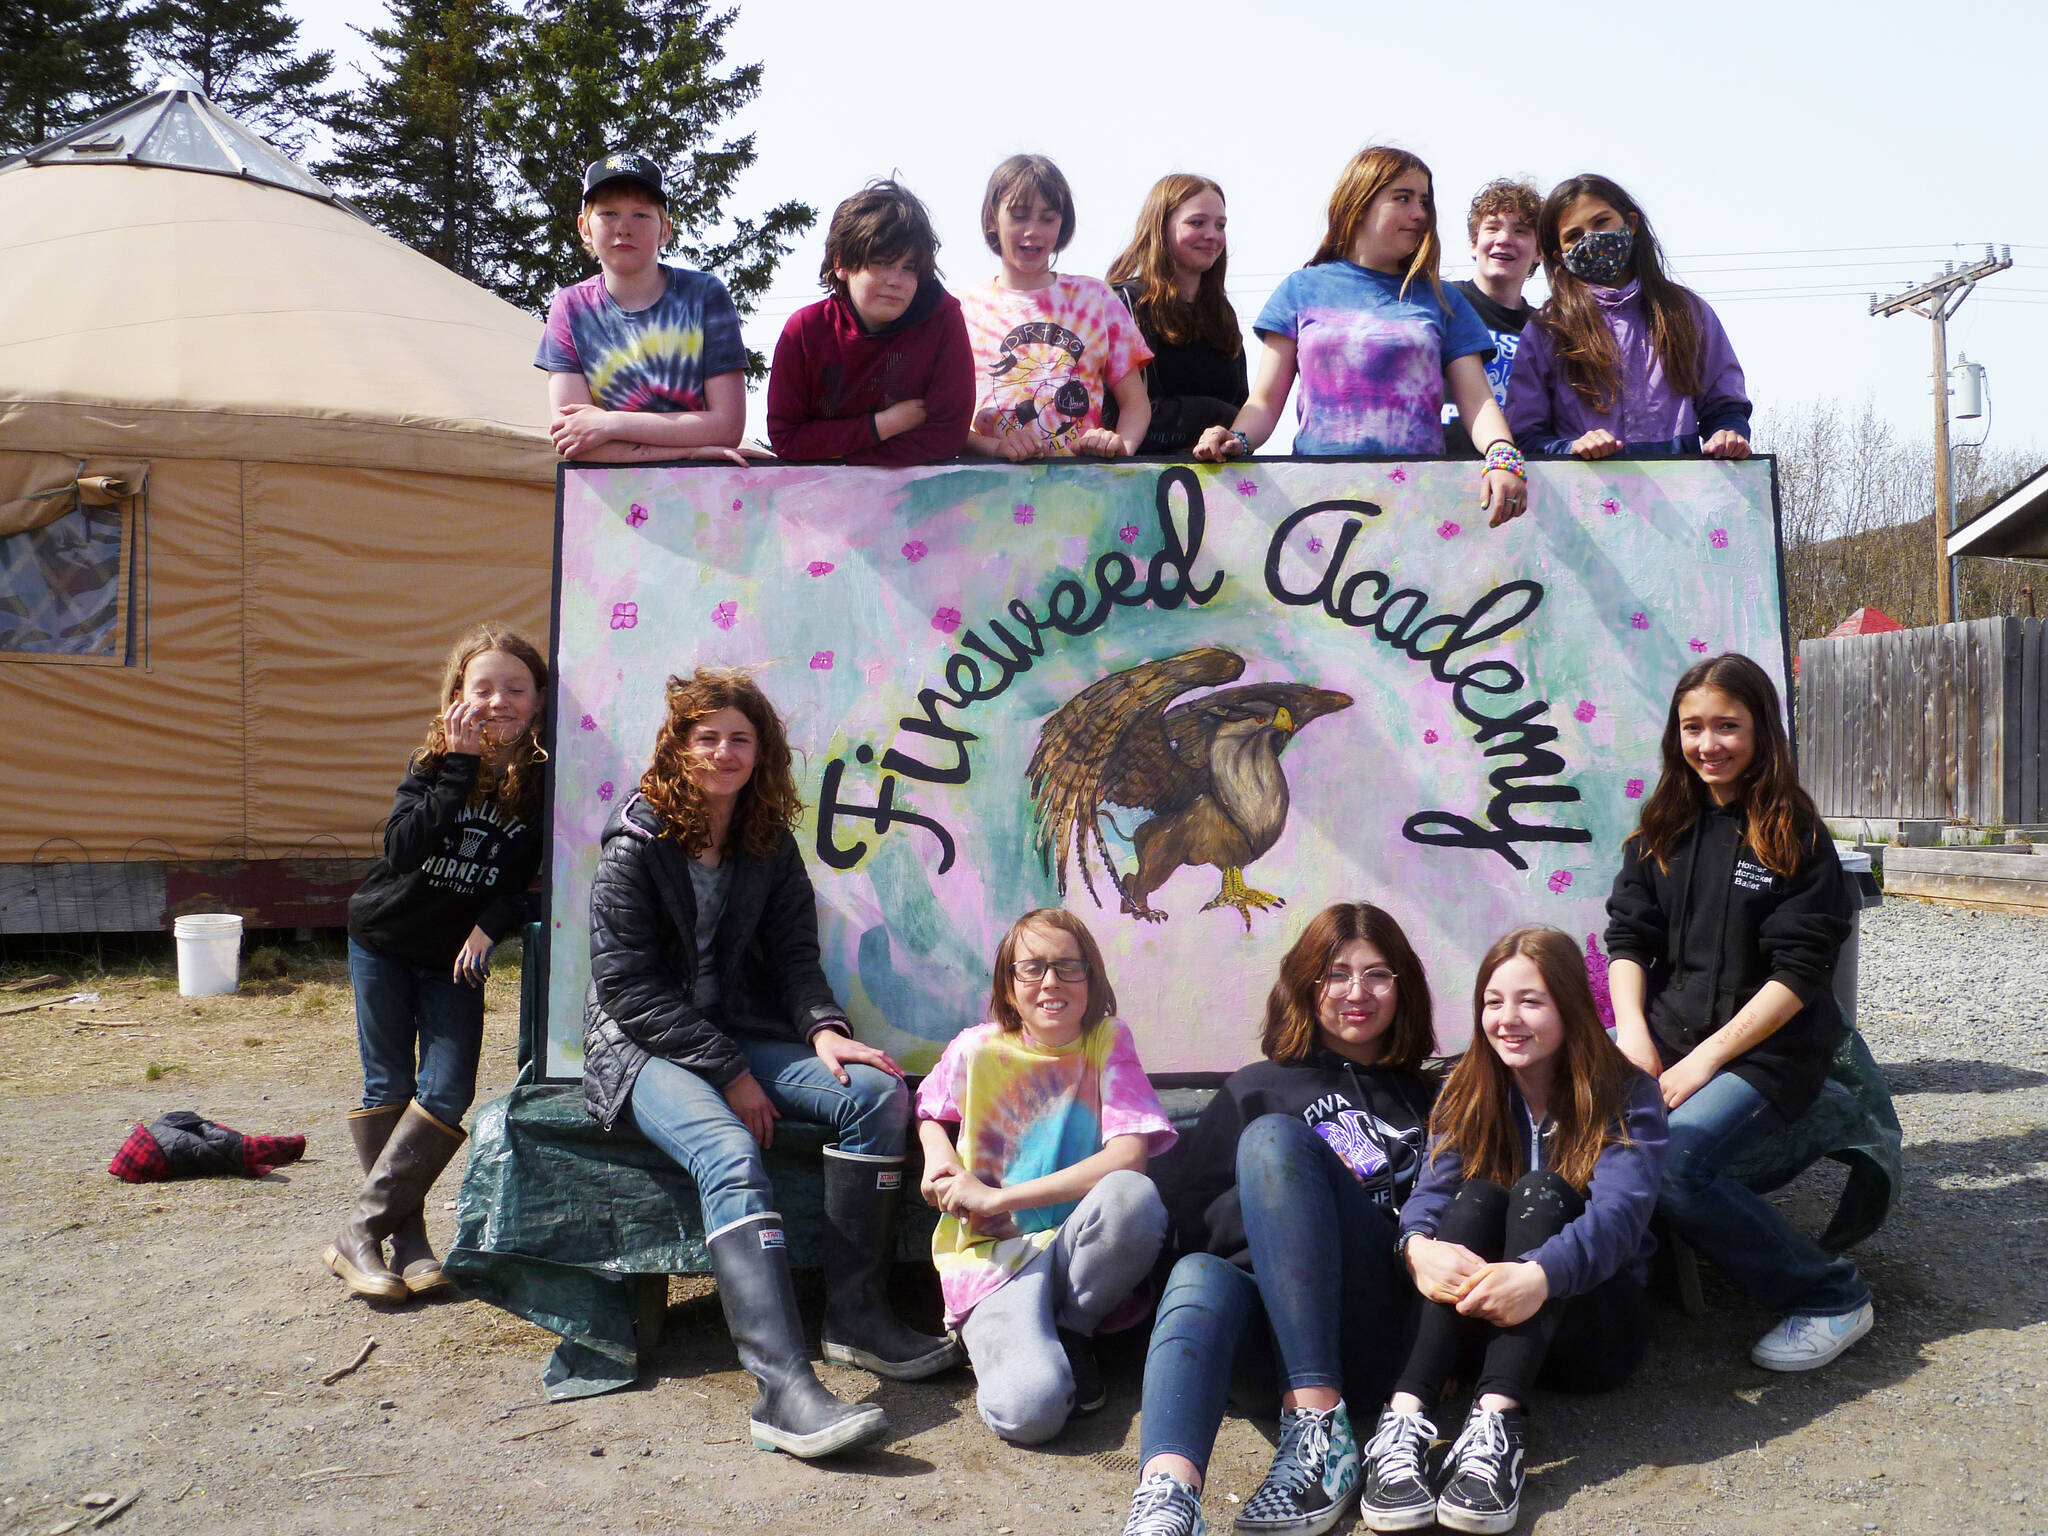 Sixth-grade Fireweed Academy students on Wednesday, May 11, 2022 spent the day working and playing with Little Fireweed students at Little Fireweed Academy in Homer, Alaska. As part of their day, they created a new sign for Big Fireweed with the help of artists Margie Scholl and Sharlyn Young. Posing with the sign are, back row, from left to right, Paul Person, Asher Faucher, Ayda Henry, Mayzie Kee, Ilsa Golden, Olin Braund, and Pearl Sethi. In the front row, from left to right, are Ames Kincaid, Cecily Shavelson, For Strobel, Stella Condon, Izzy Clarke and Ani Cook. (Photo courtesy of Fireweed Academy) Top Row: